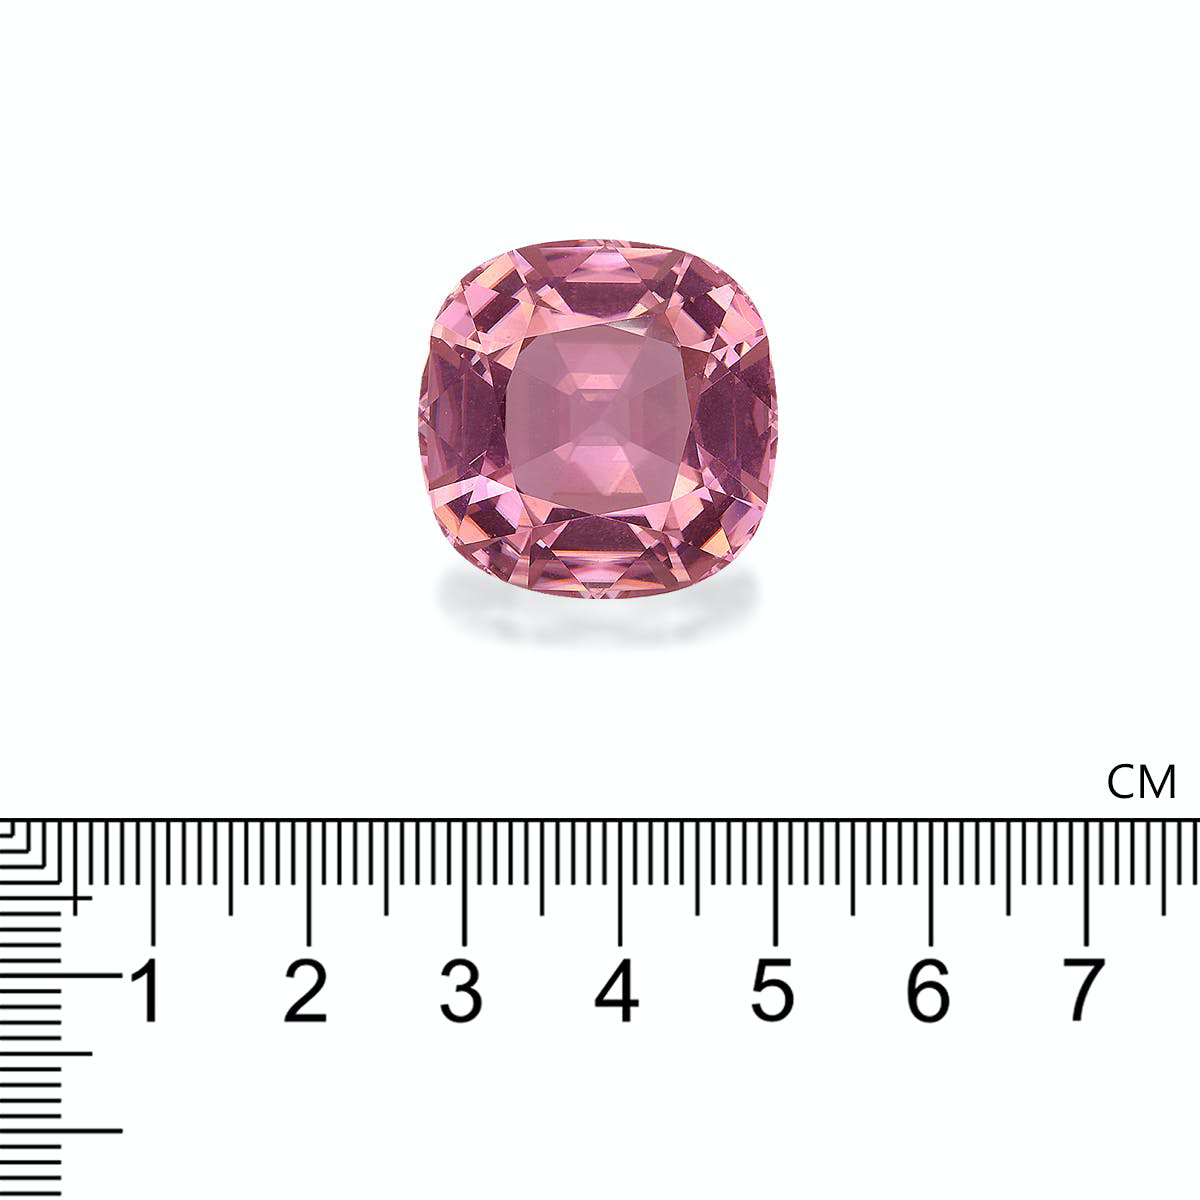 Picture of Flamingo Pink Tourmaline 60.04ct - 23mm (PT1138)